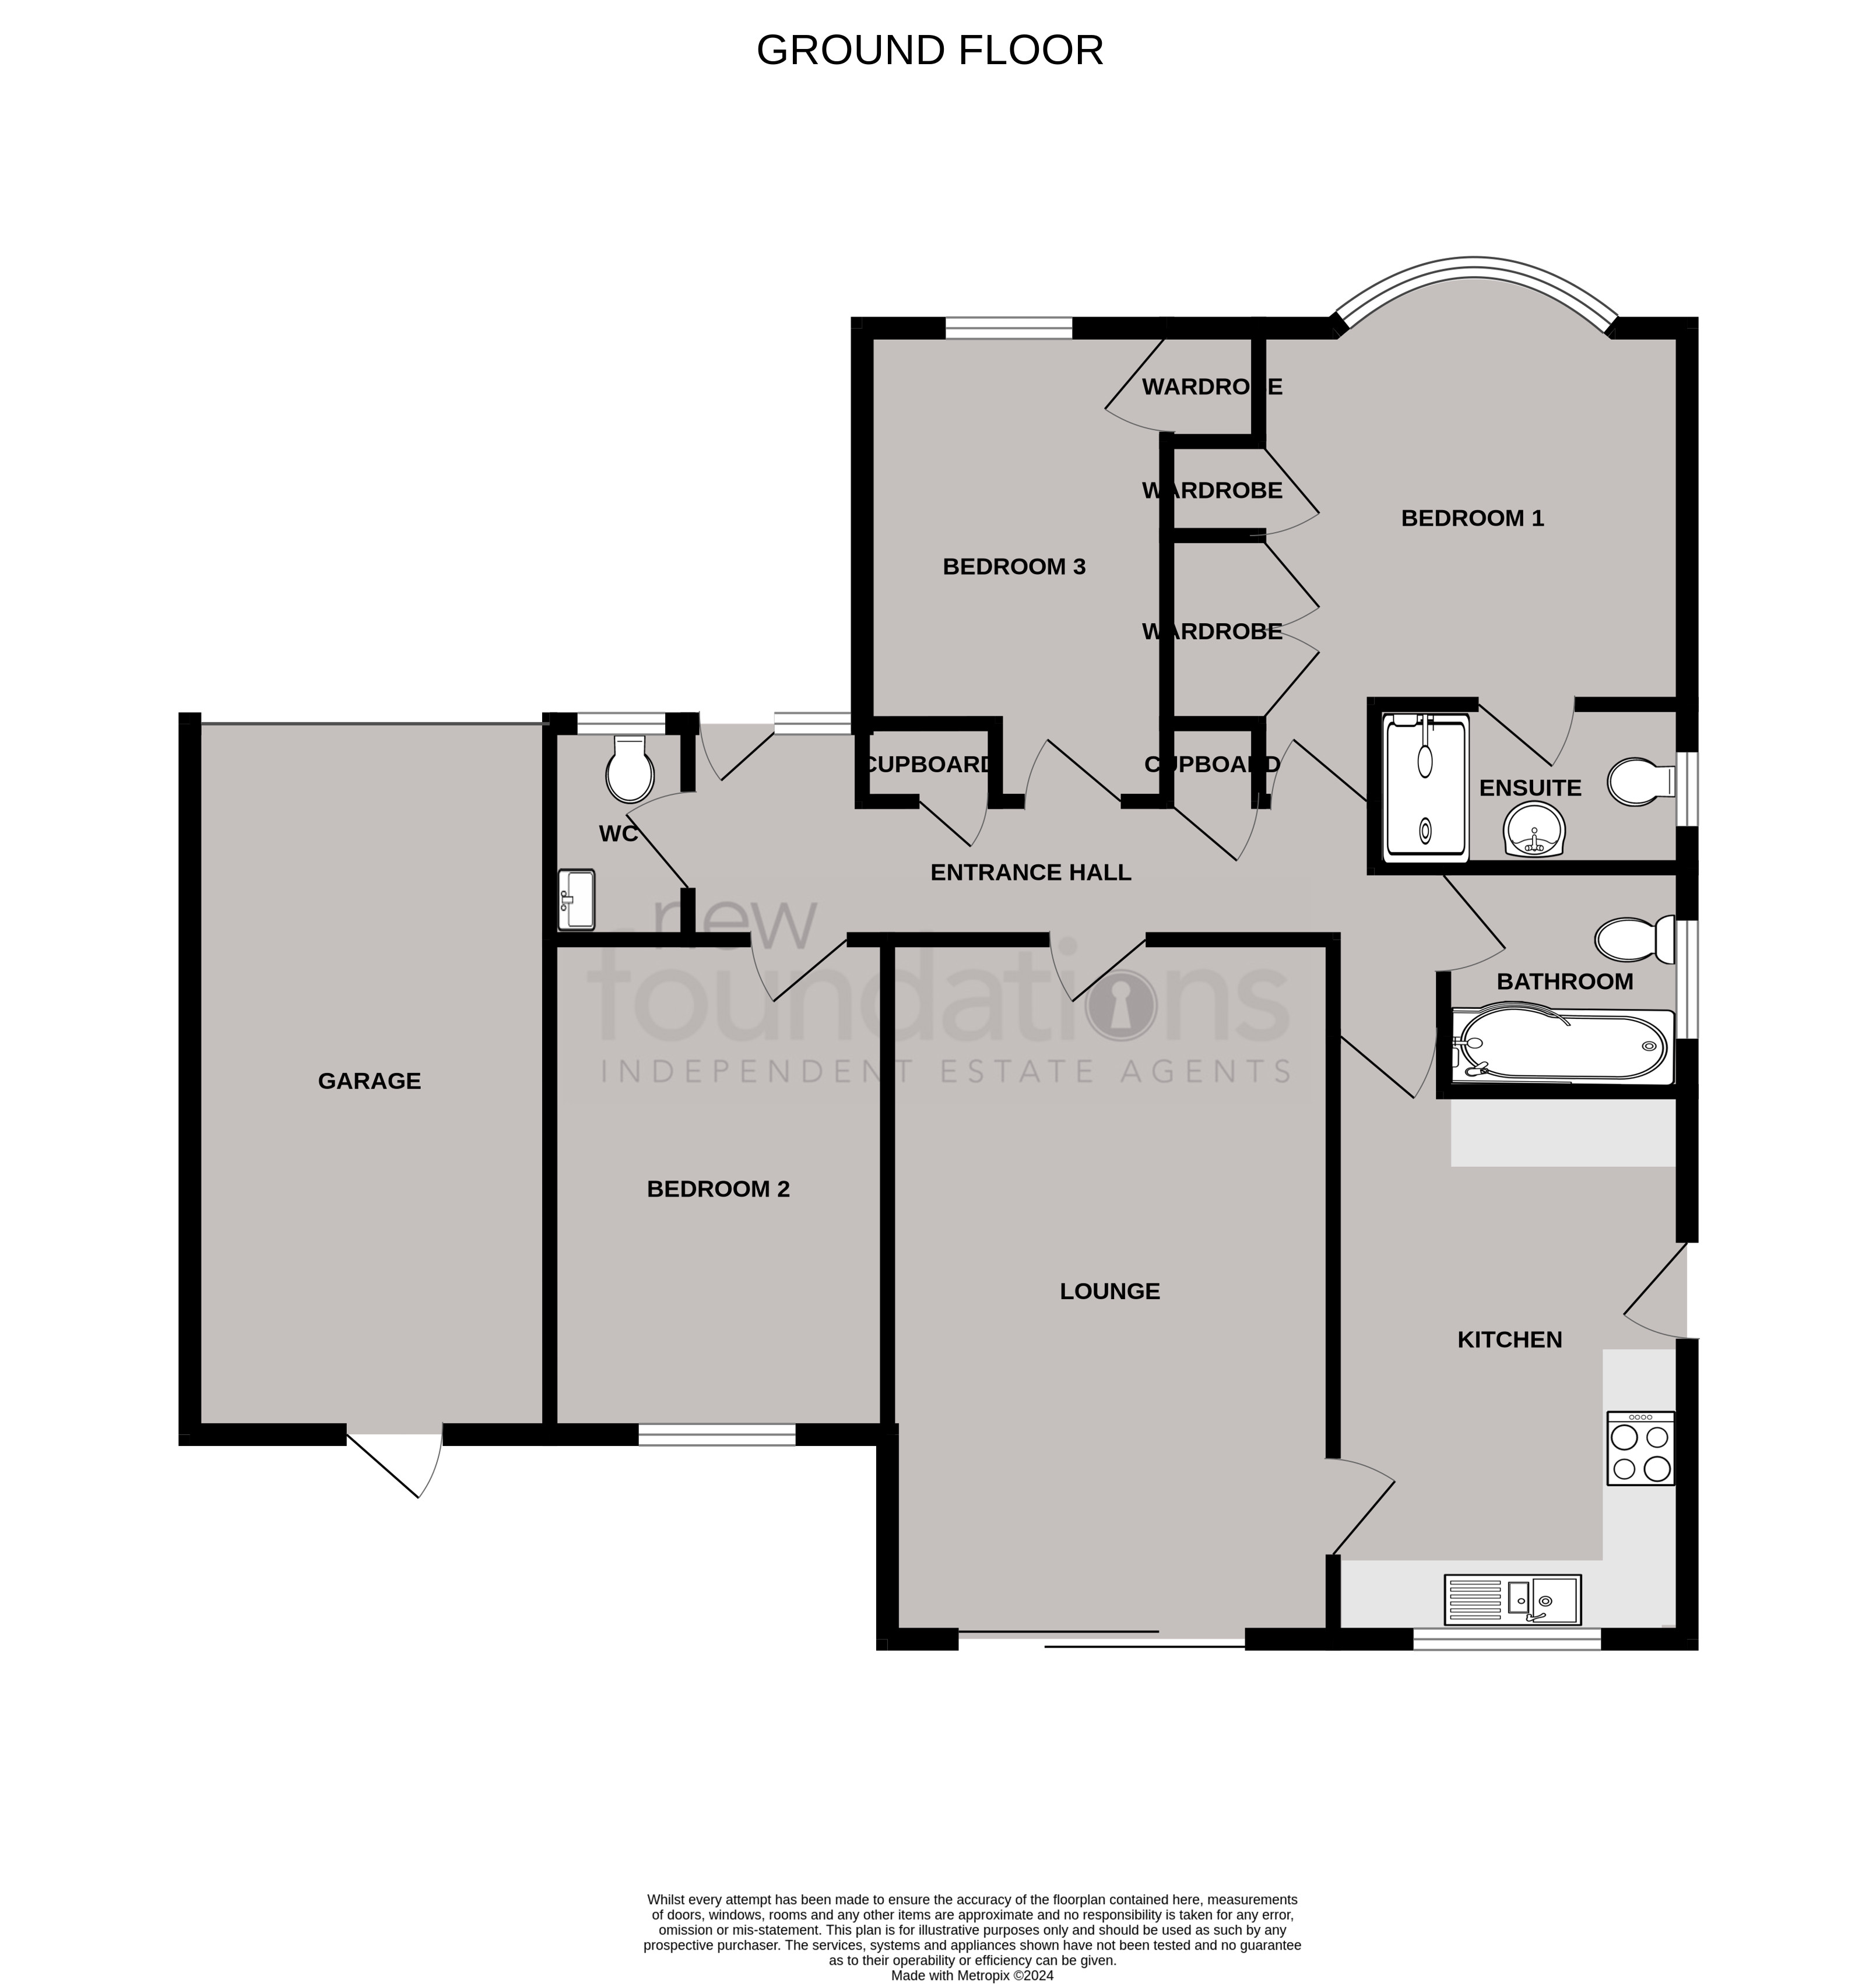 Floorplans For Spring Lane, Bexhill-on-Sea, East Sussex